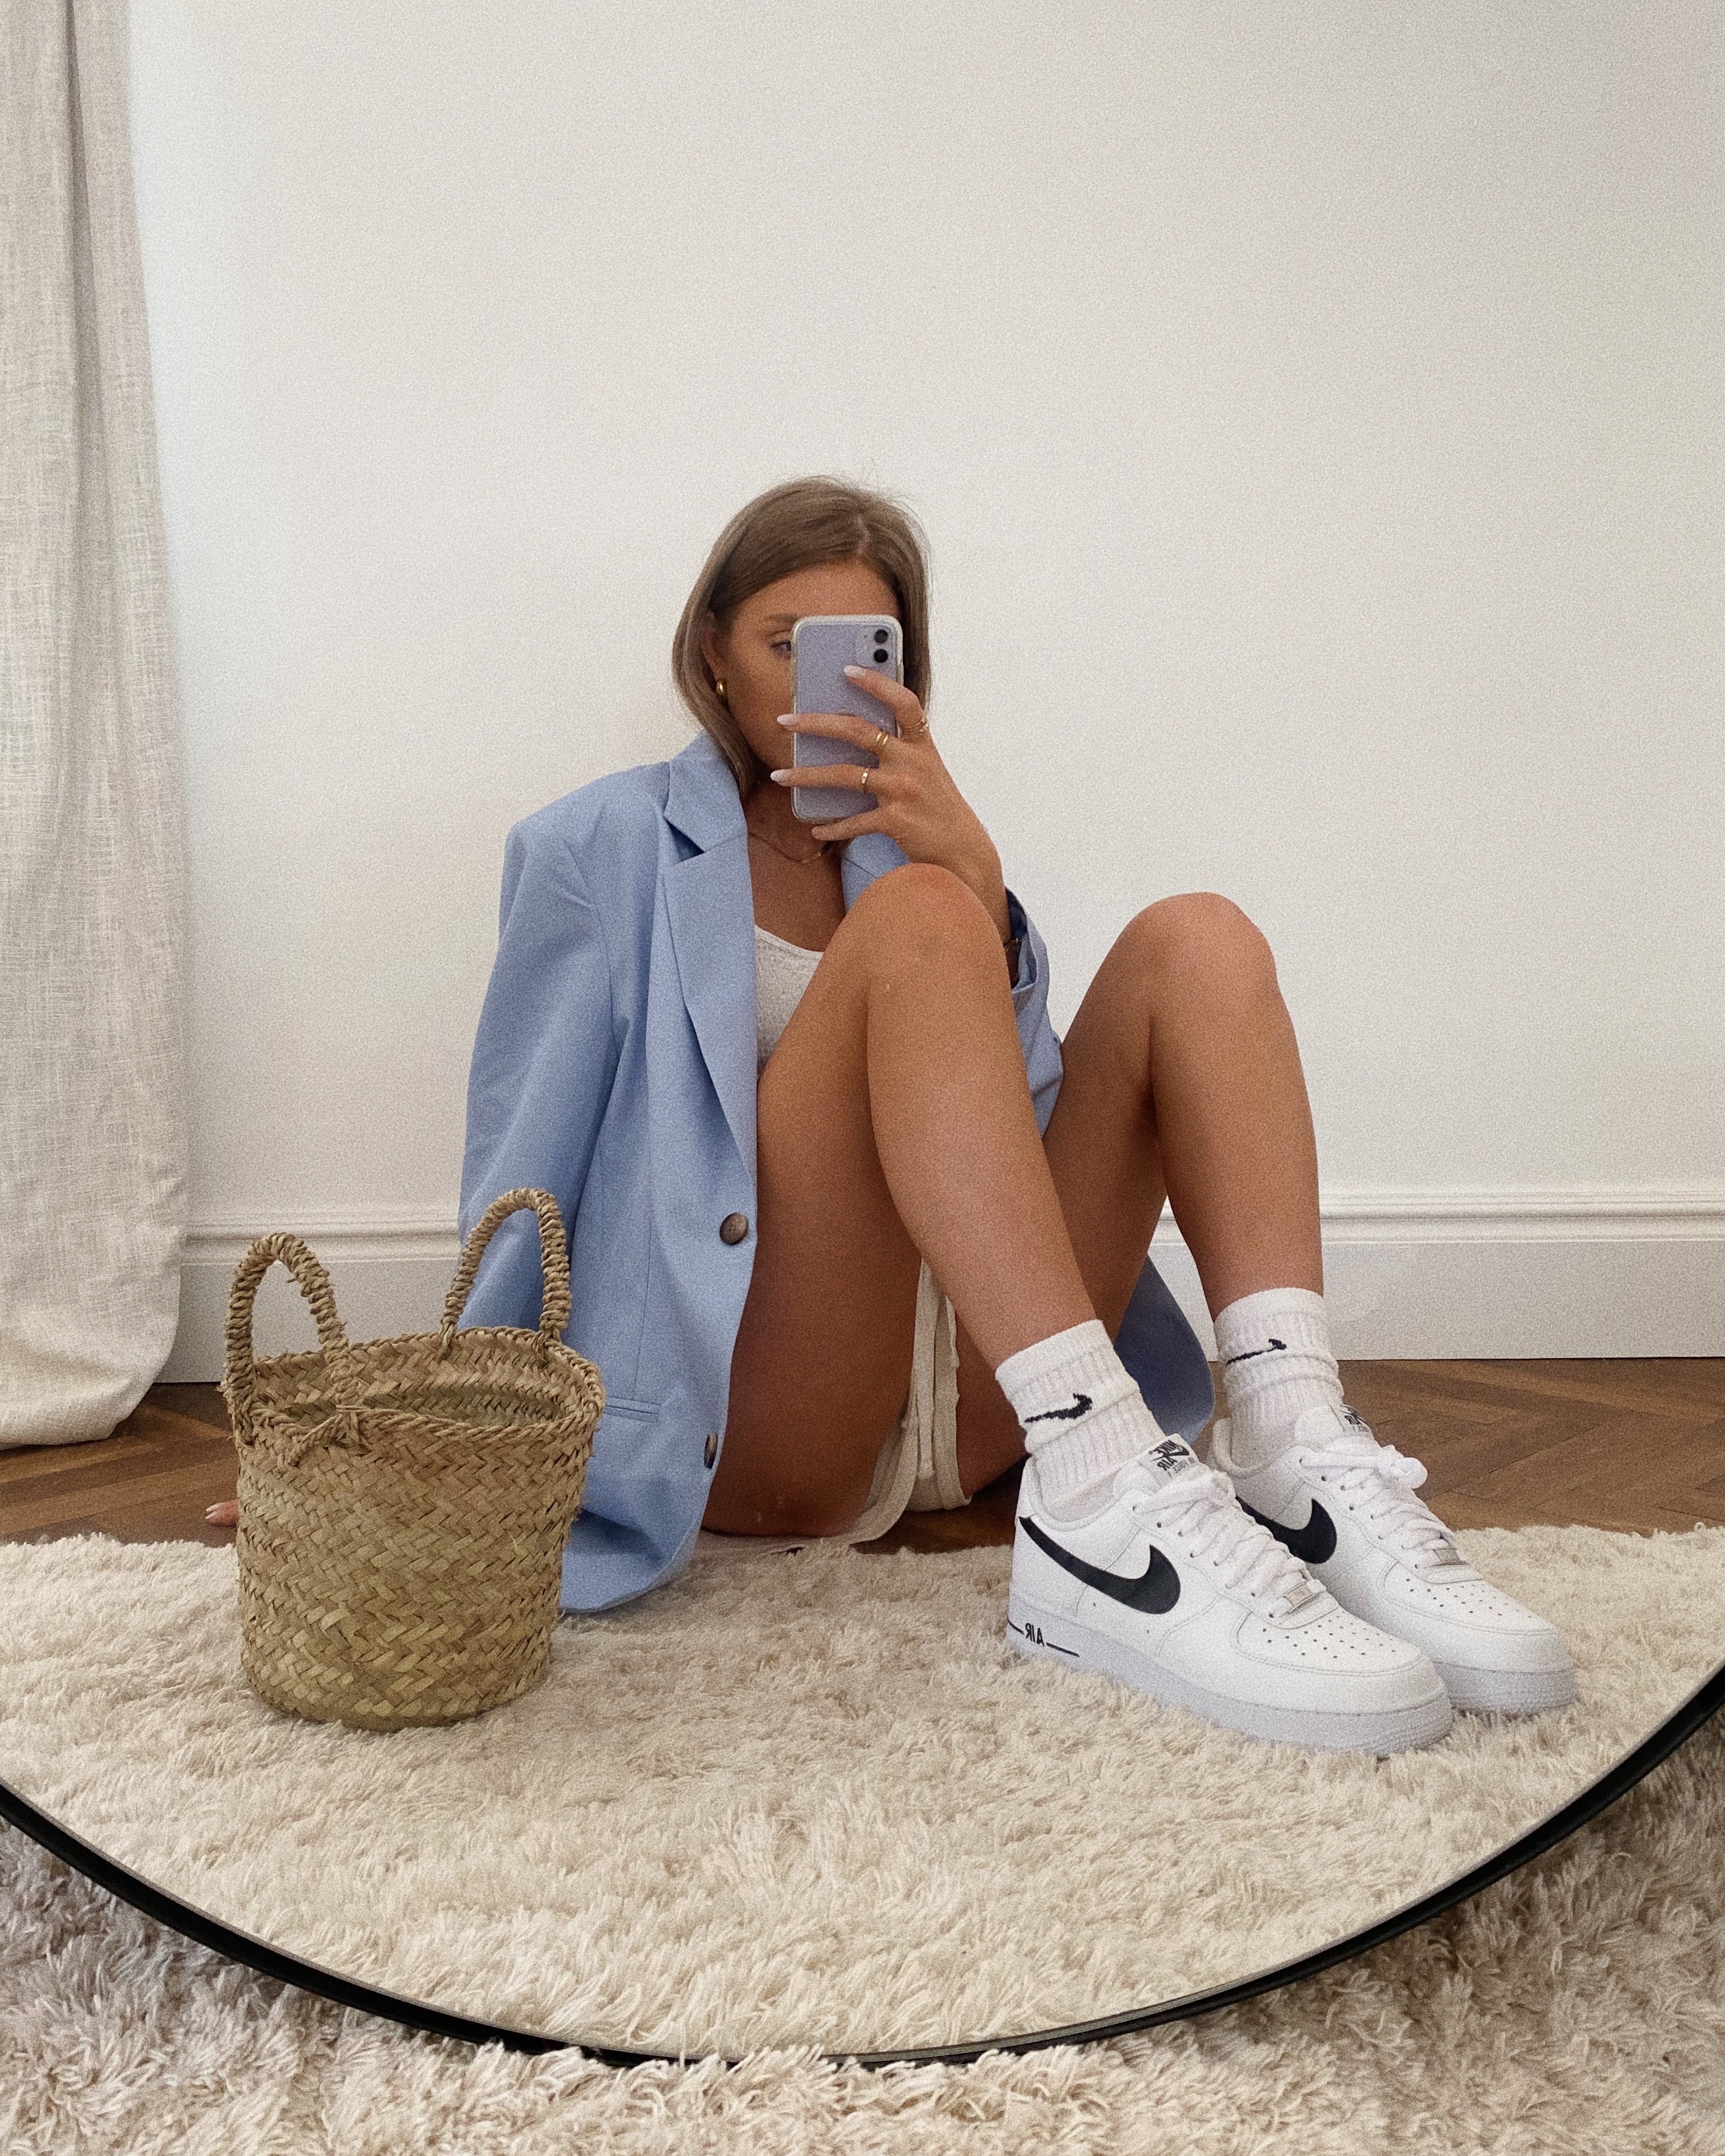 10 Easy Ways To Style Nike Air Force 1 This Summer – Love Style